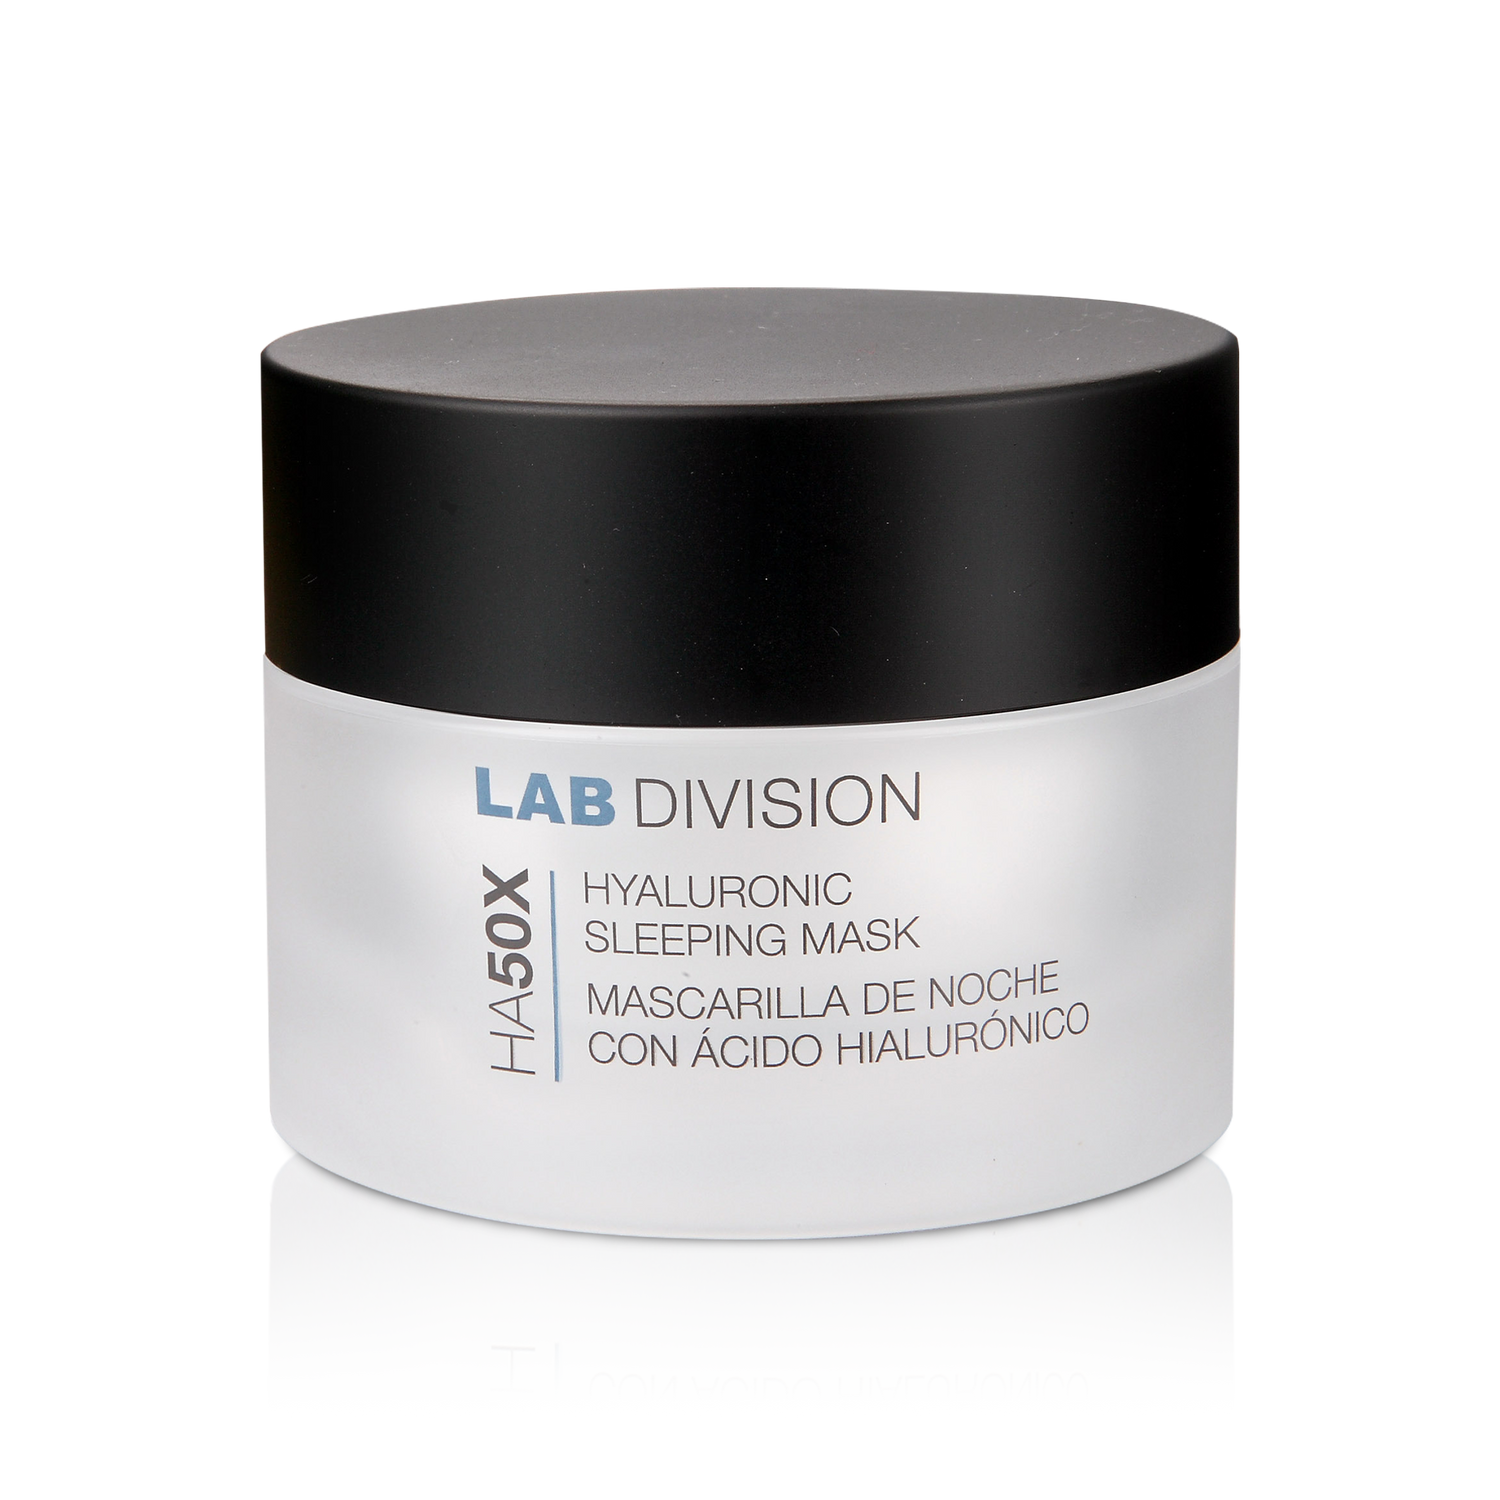 Lab Division HA50X Hyaluronic Sleeping Mask